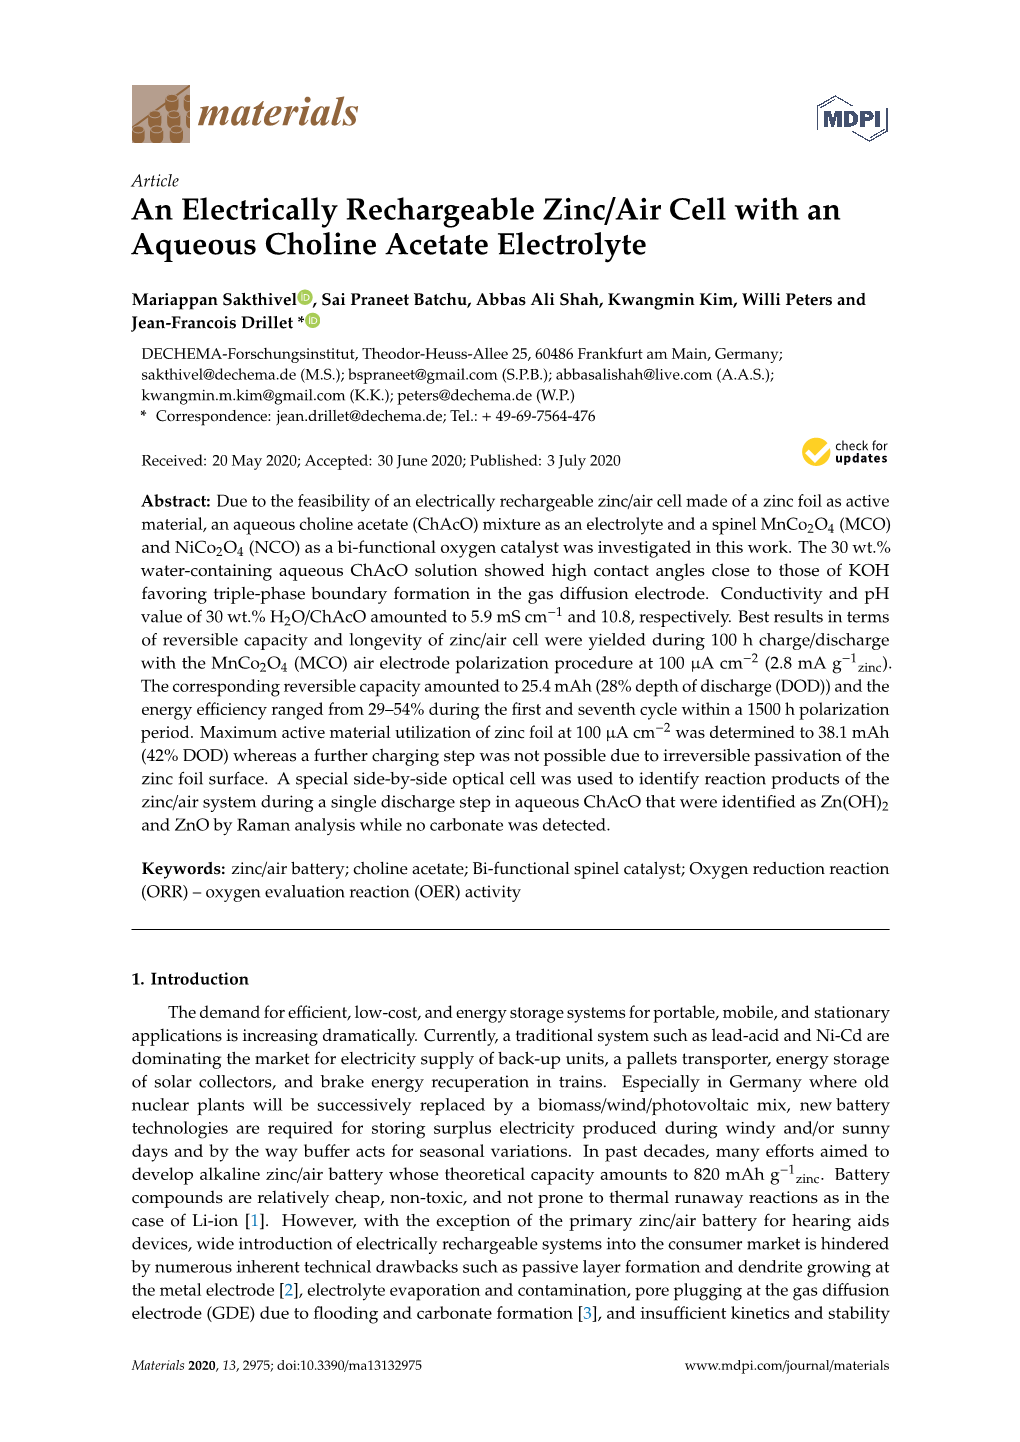 An Electrically Rechargeable Zinc/Air Cell with an Aqueous Choline Acetate Electrolyte